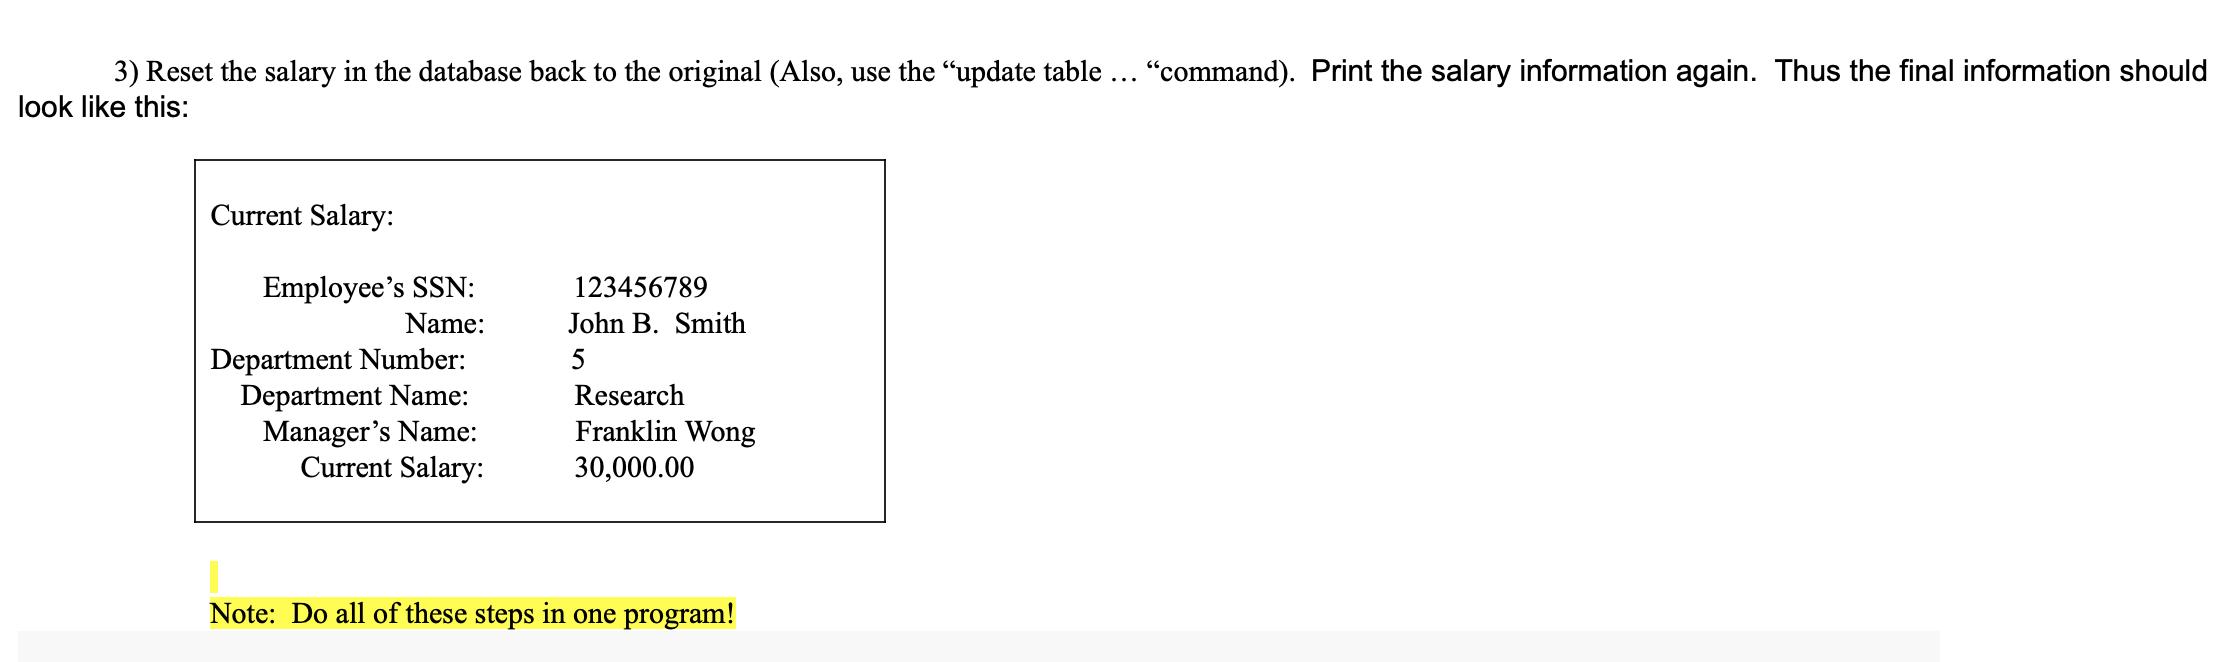 3) Reset the salary in the database back to the original (Also, use the "update table ... "command). Print